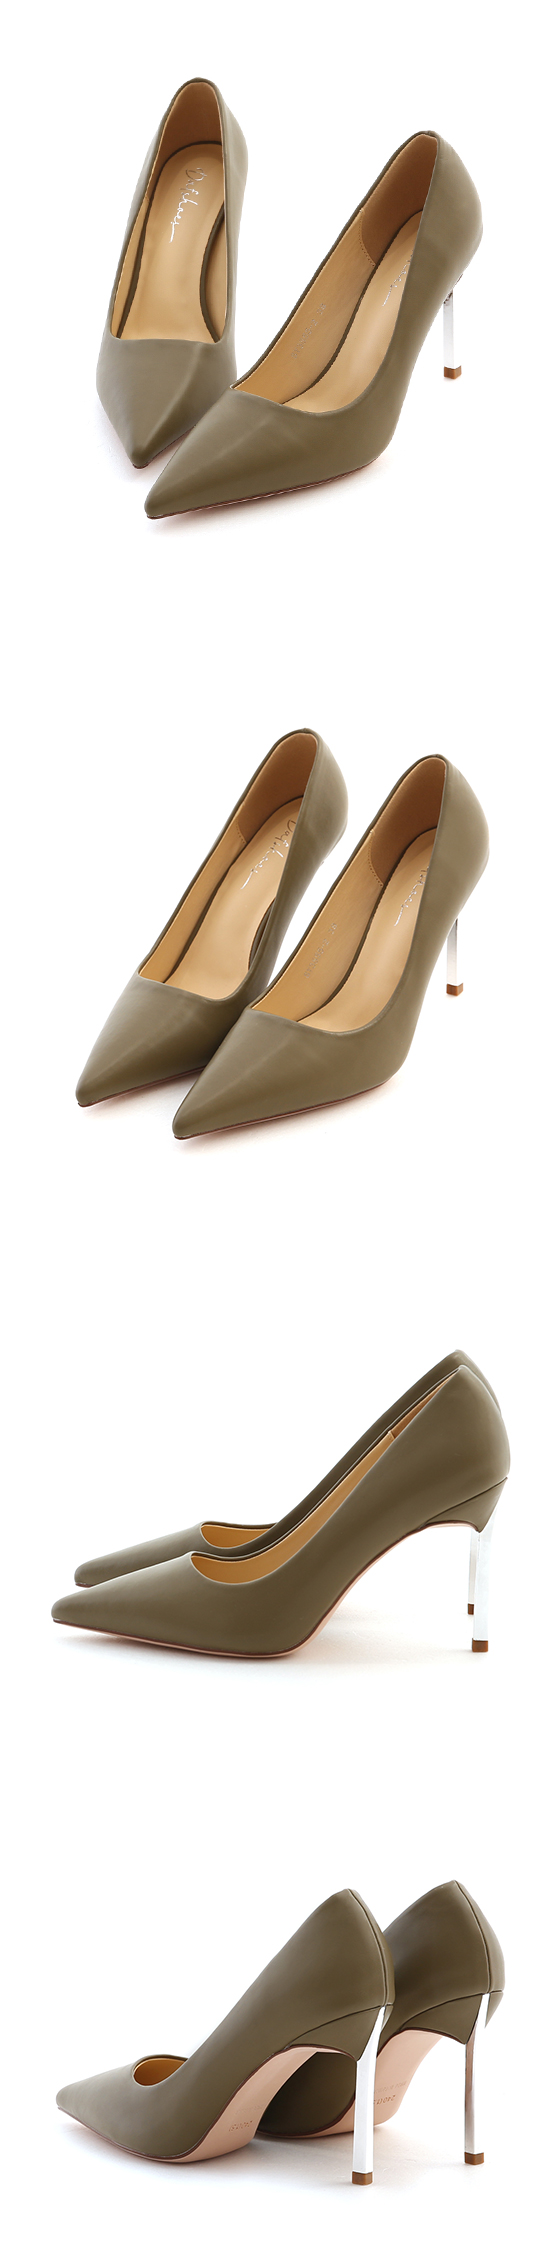 Plain Pointed Toe 9cm High-Heels Olive Green